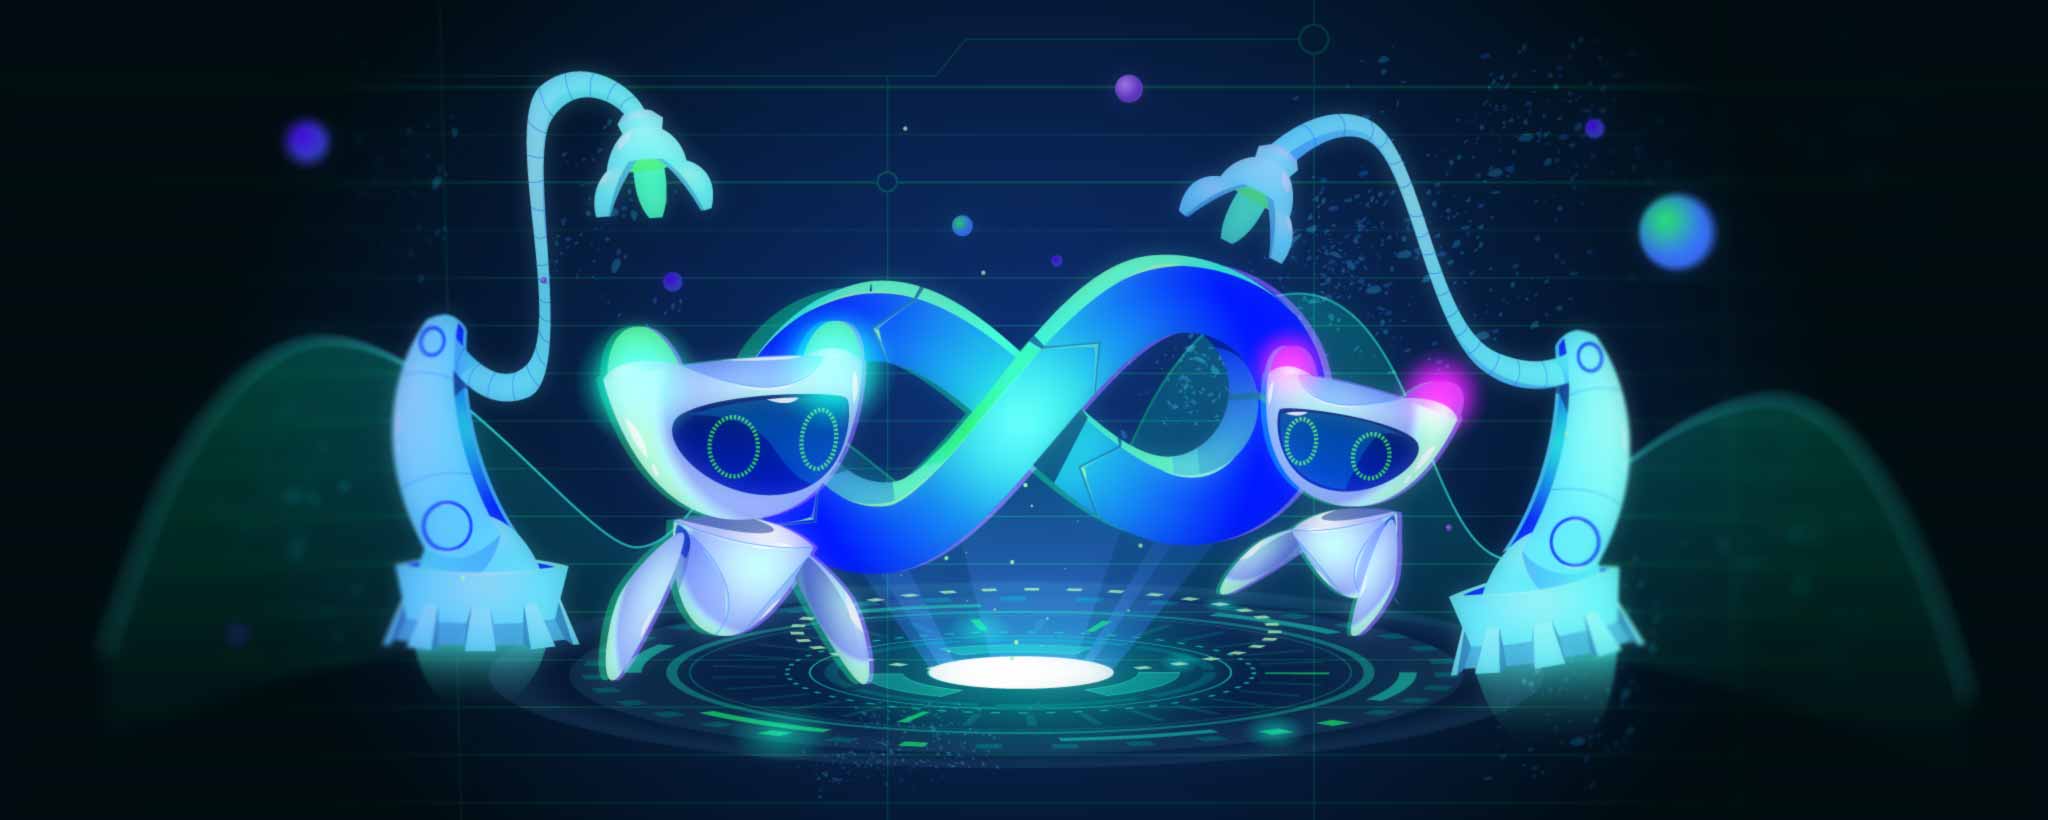 'Two AI robots with infinity symbol'